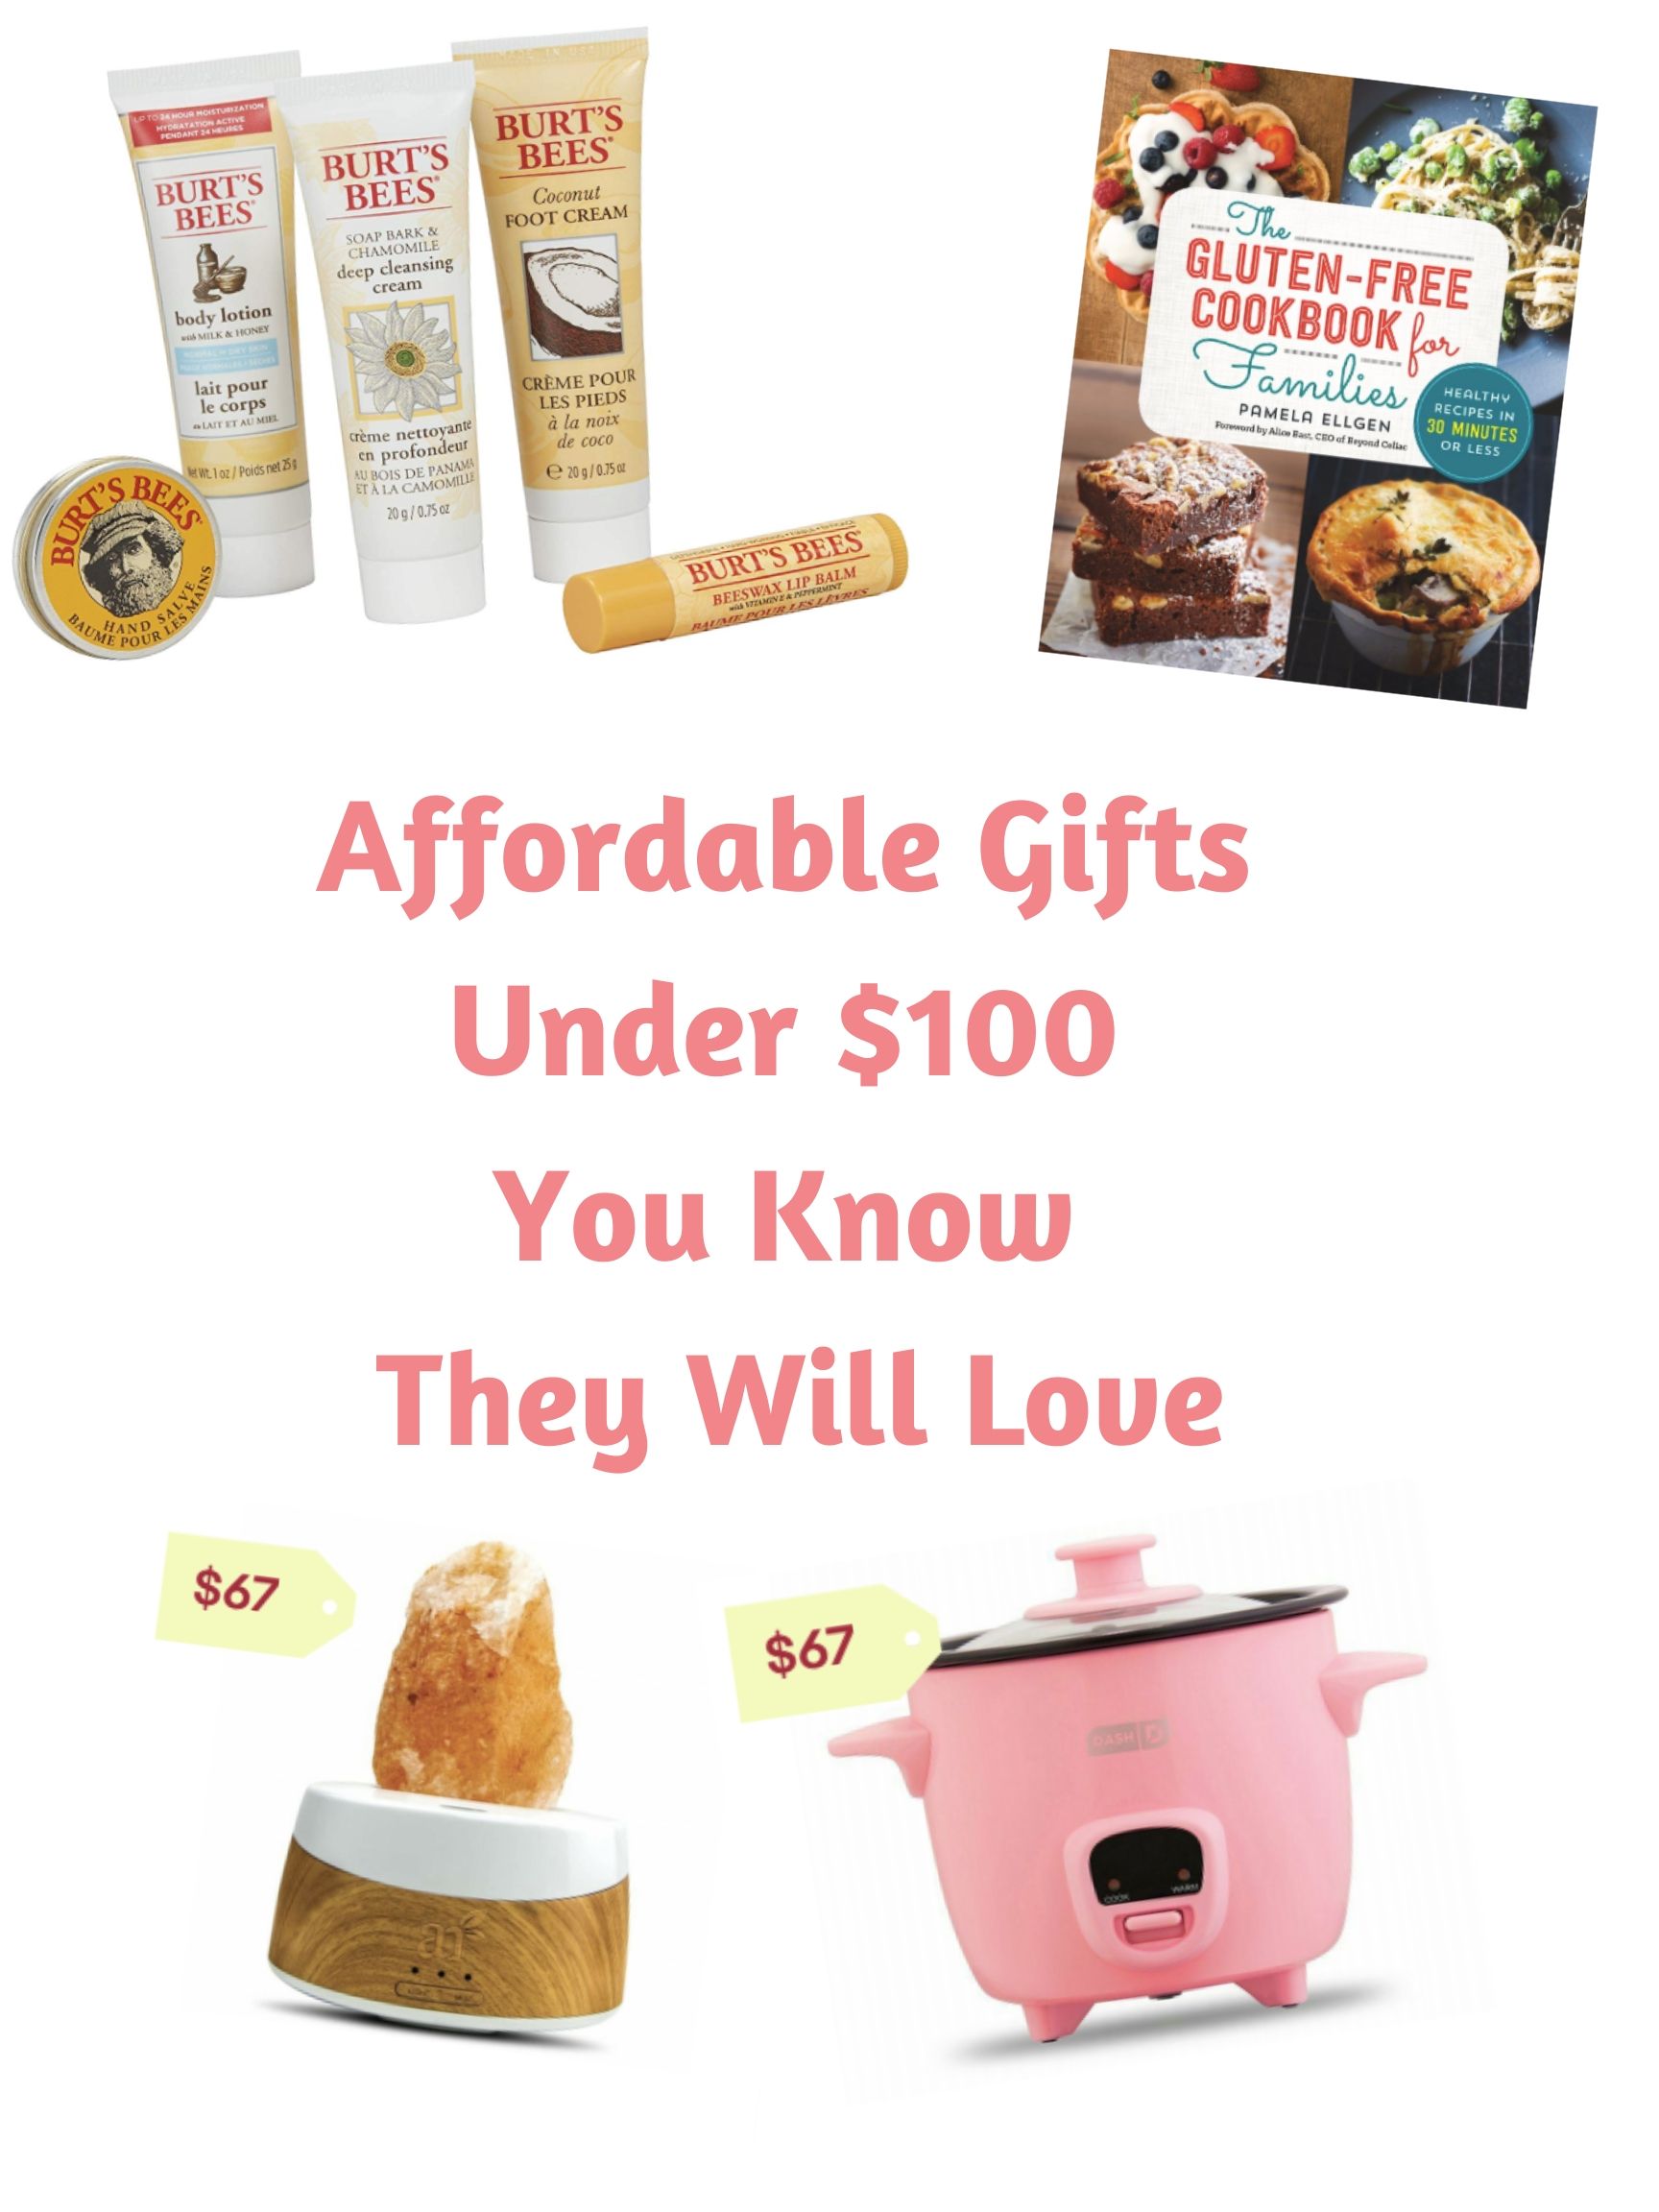 Affordable Gifts Under $100 You Know They Will Love goft guide for him her home amazon ebay